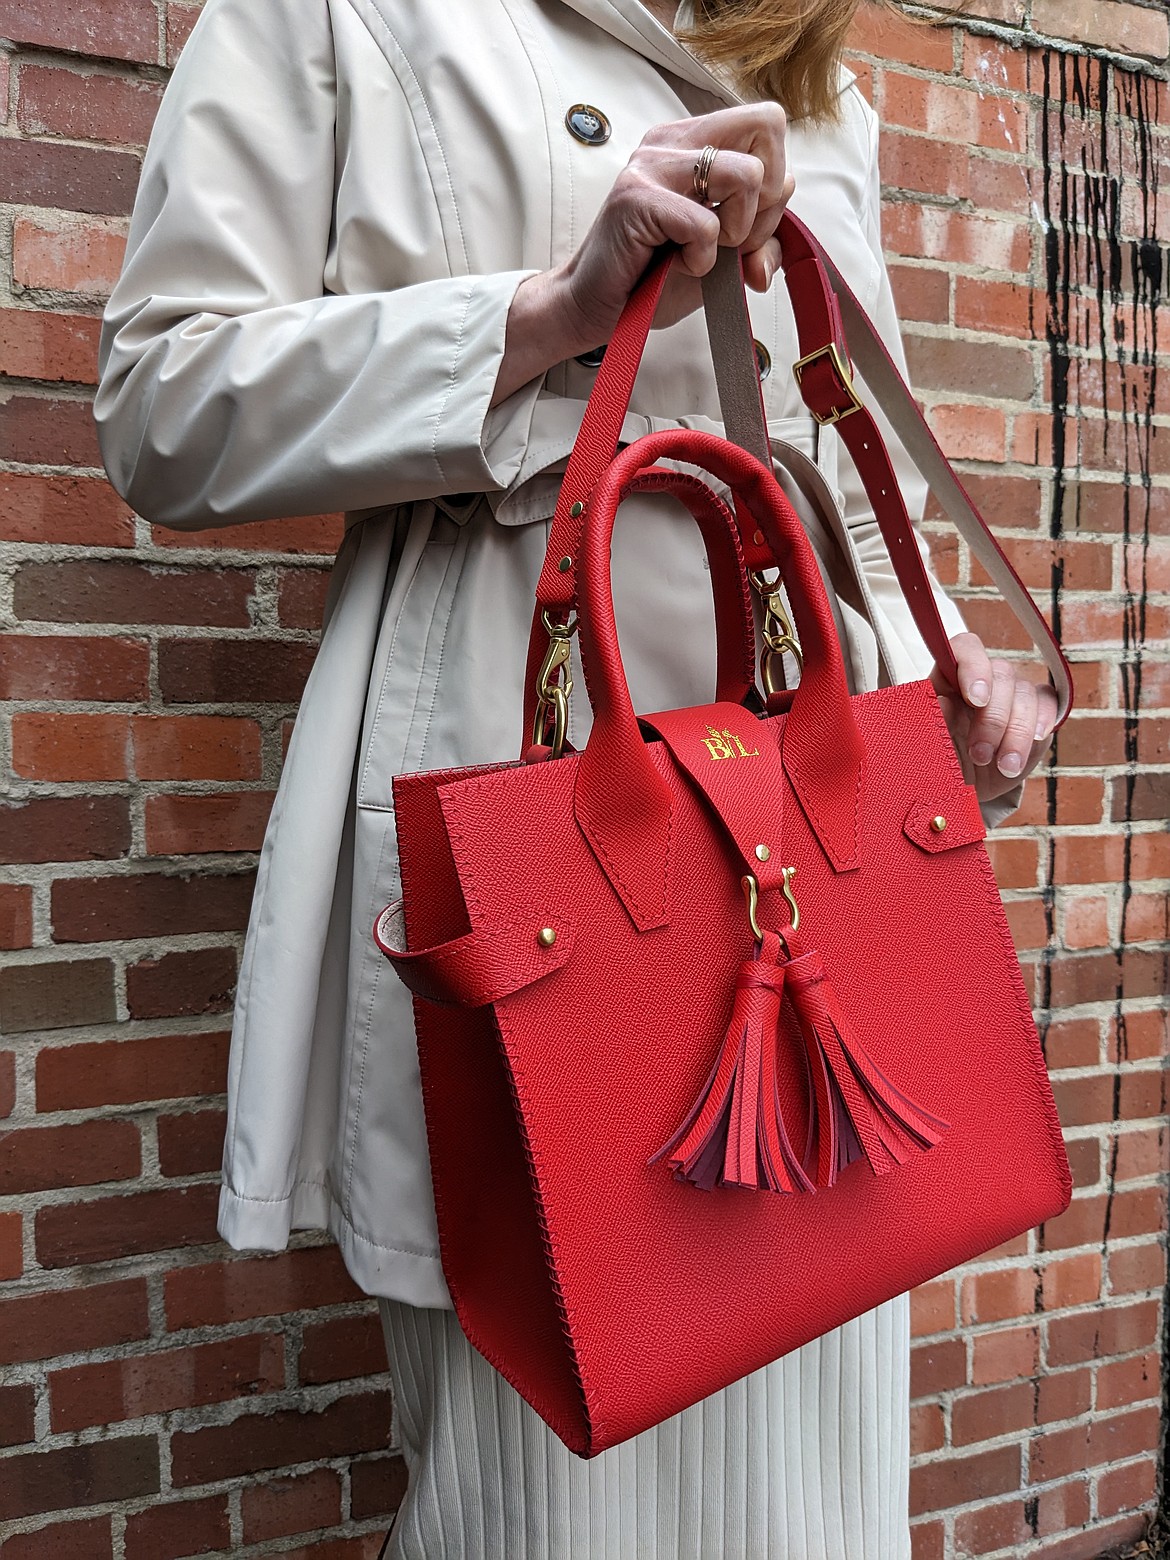 Sadie Petite in Candy Apple Red (Beargrass Leather photo)